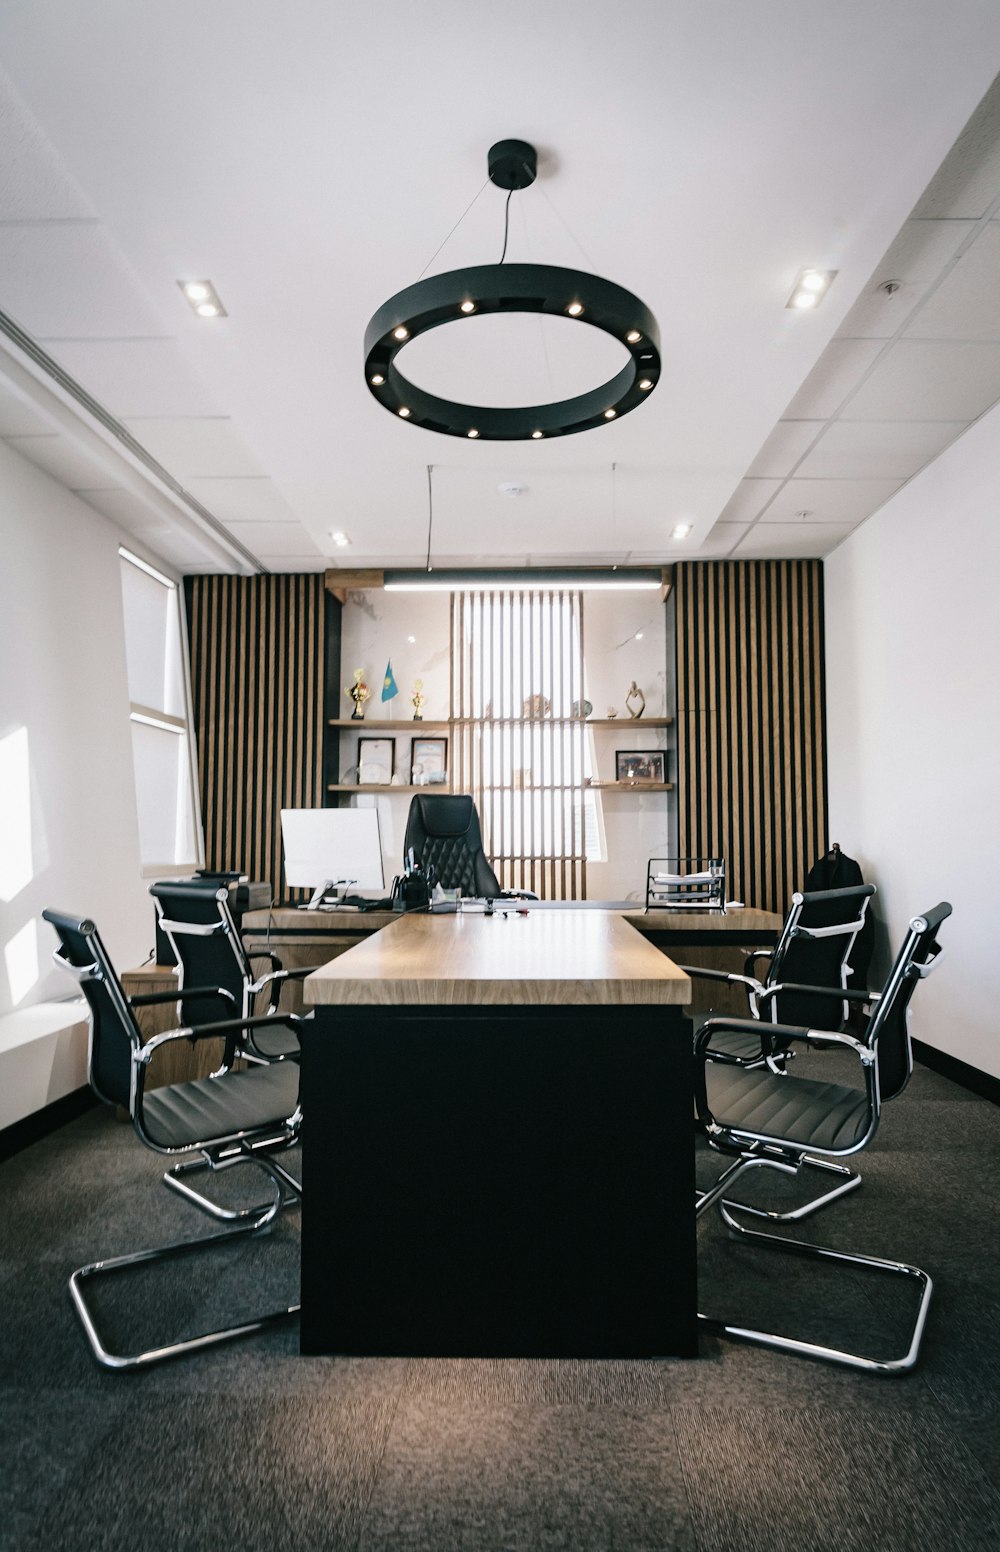 Office Room Pictures | Download Free Images on Unsplash